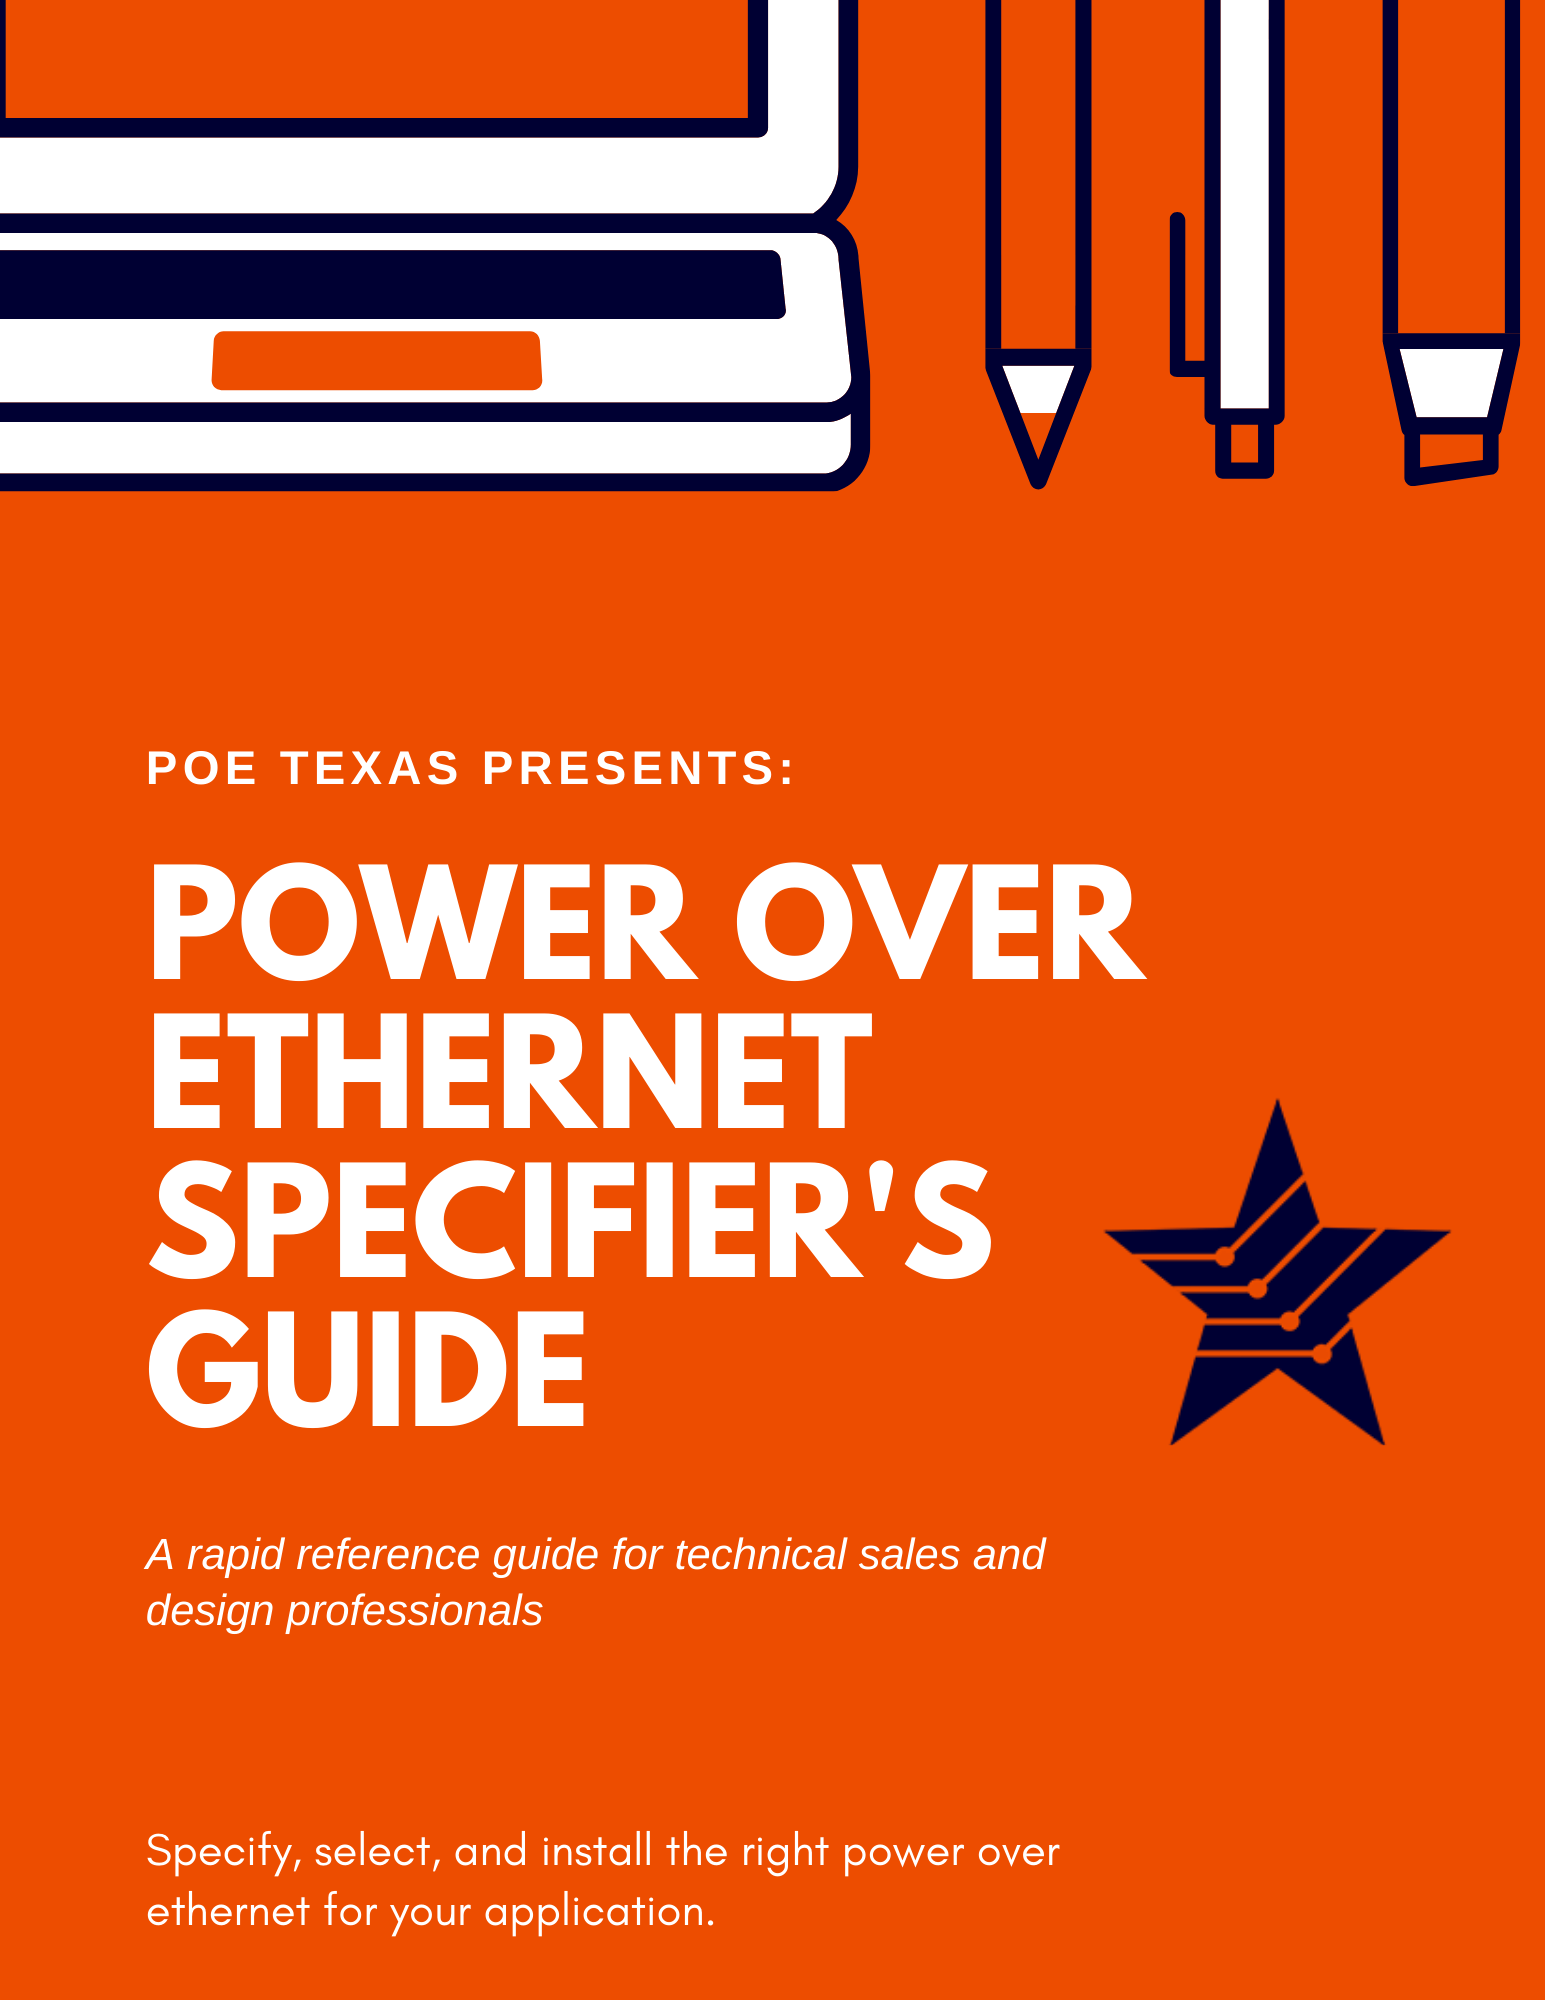 POE Texas Power Over Ethernet Specifier's Guide